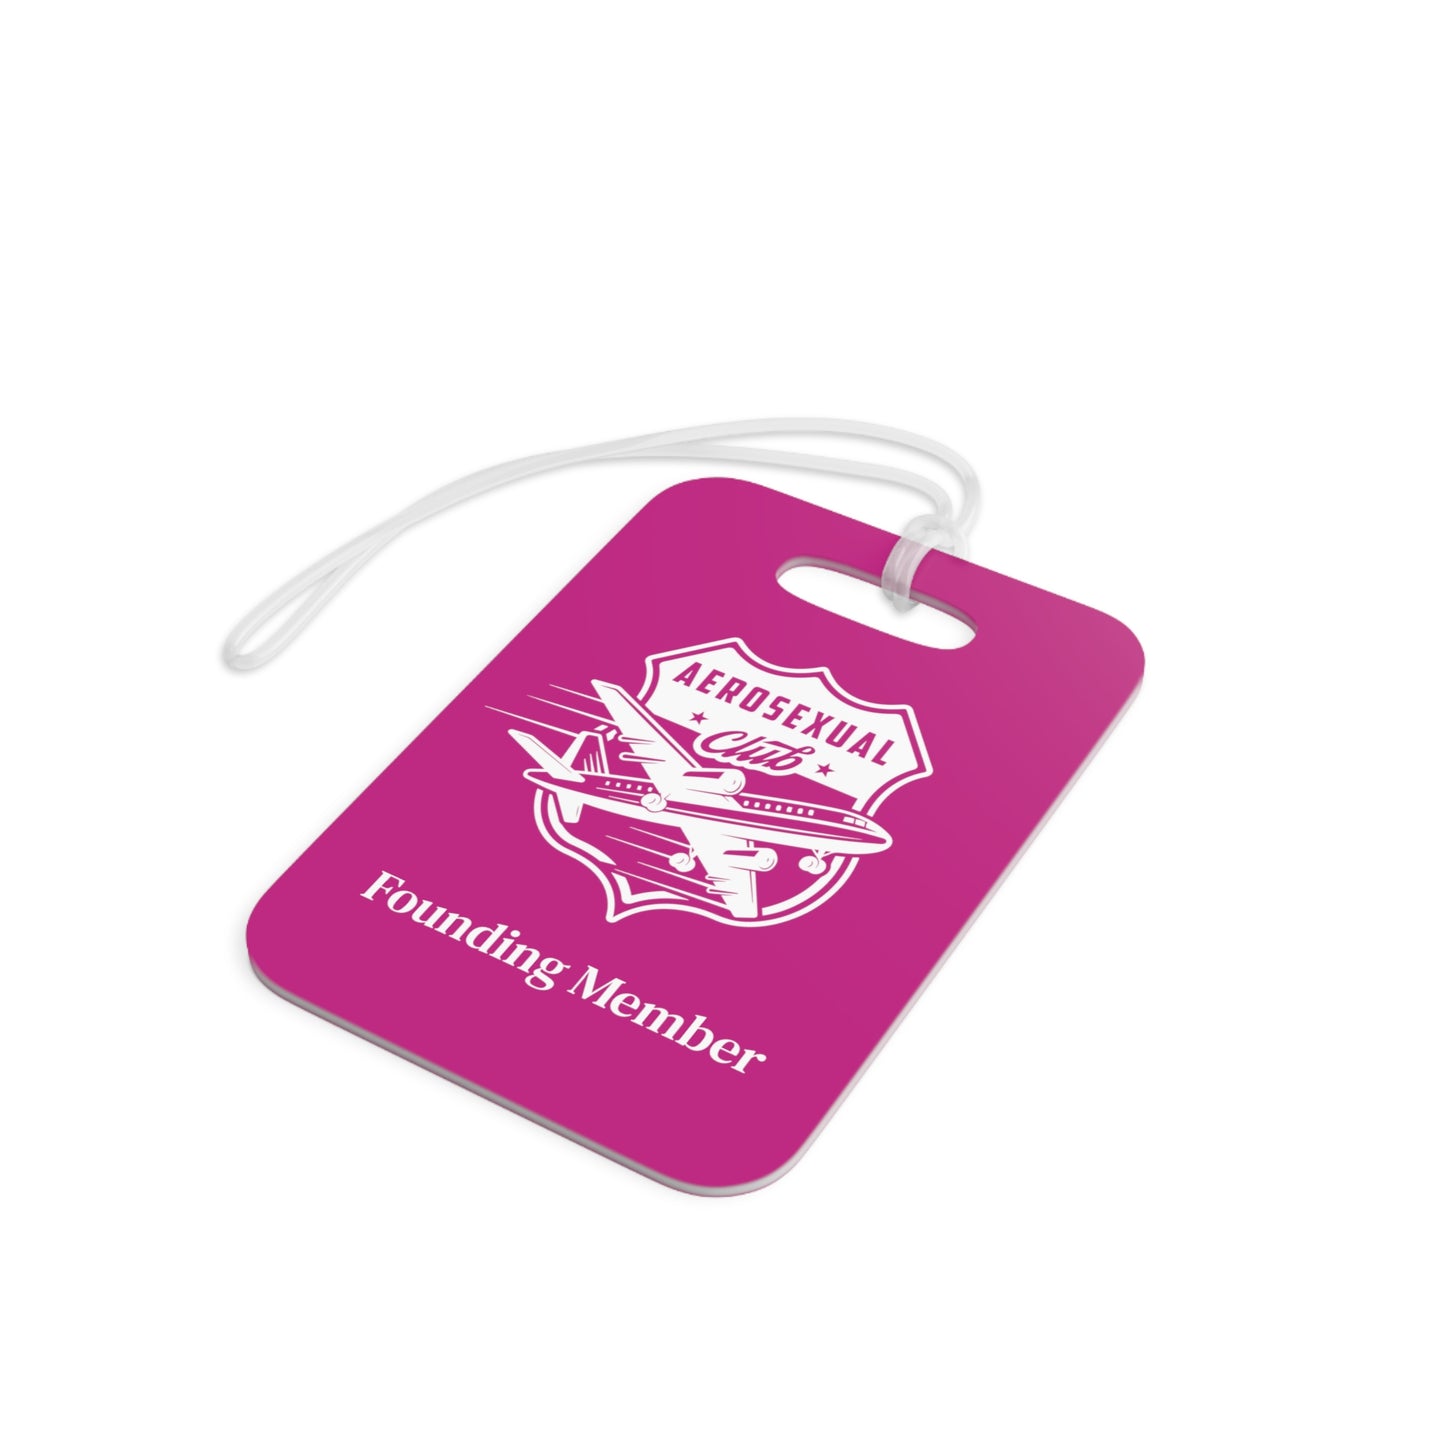 Aerosexual Club Founding Member Luggage Tag Bright Pink (Limited Edition)